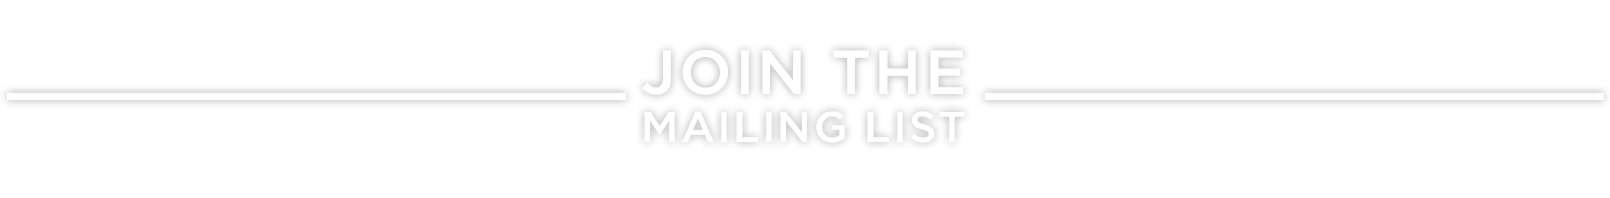 Join The Mailing List